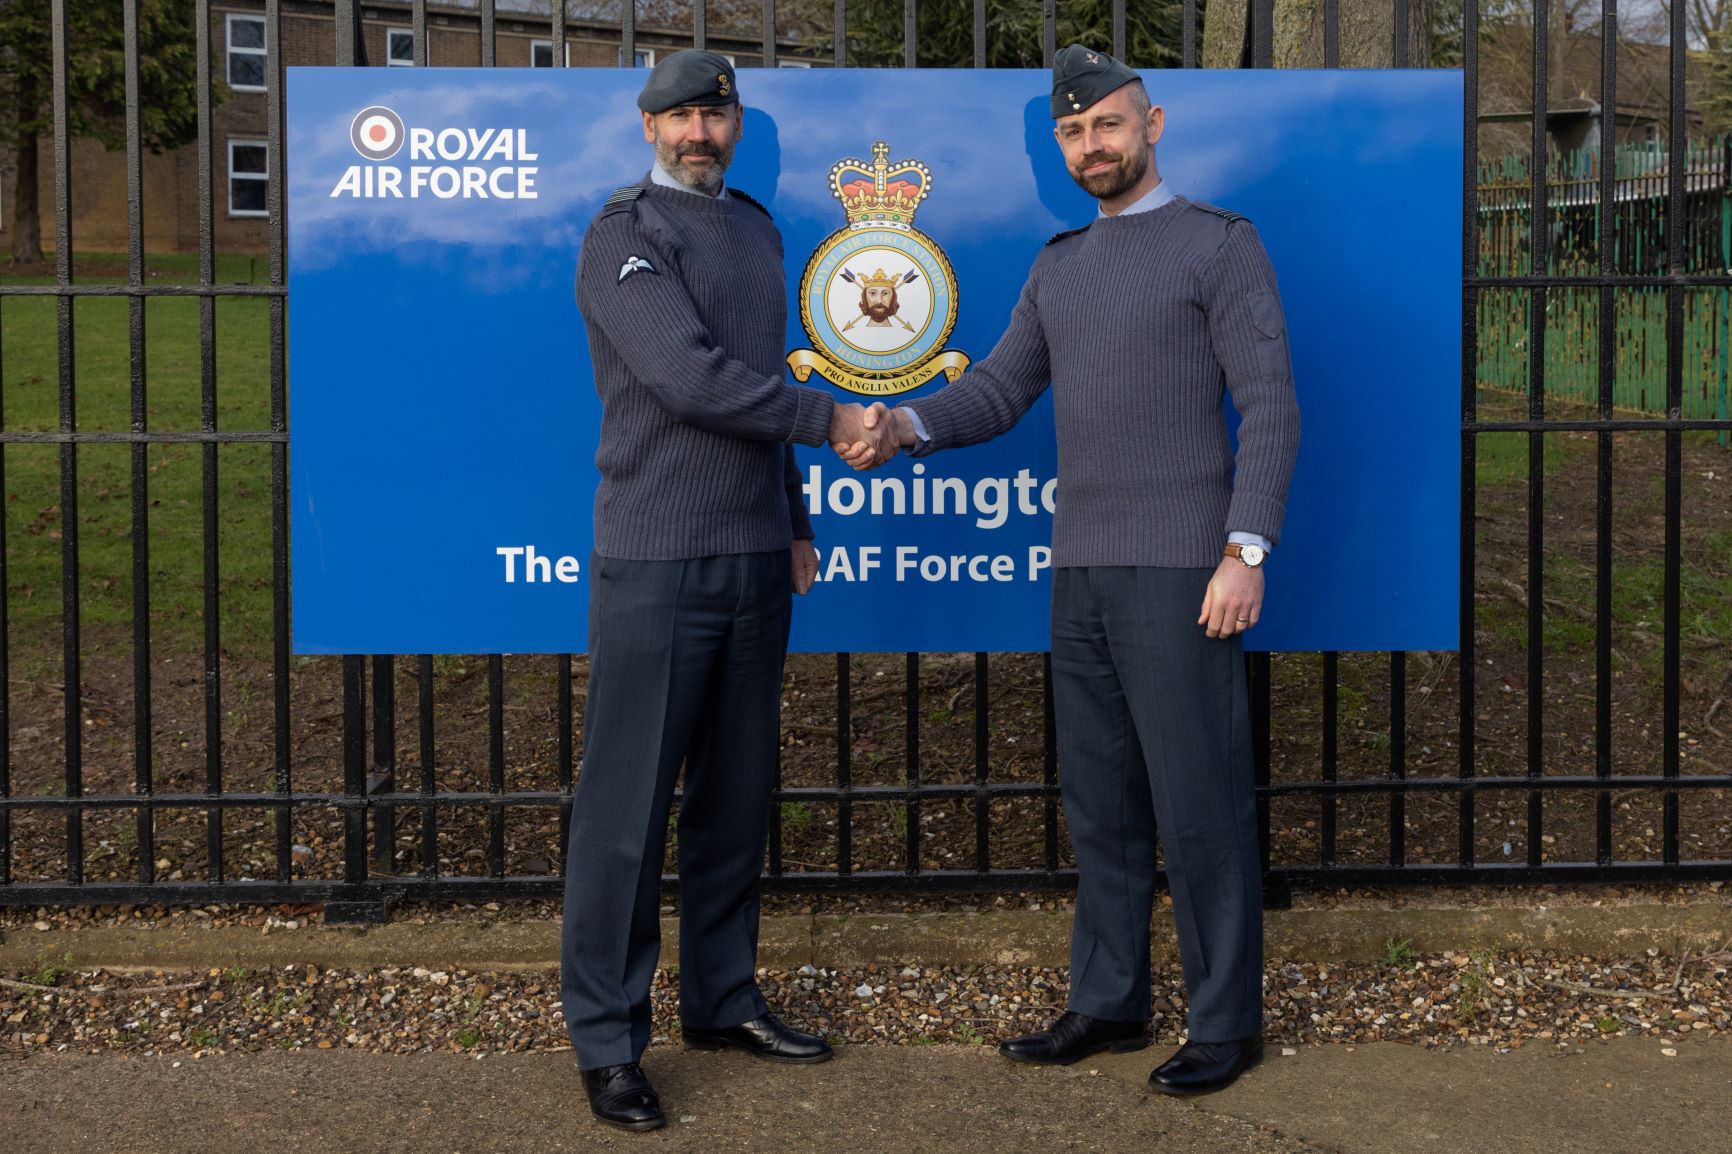 Image show Station Commander shaking hands with a RAF aviator.